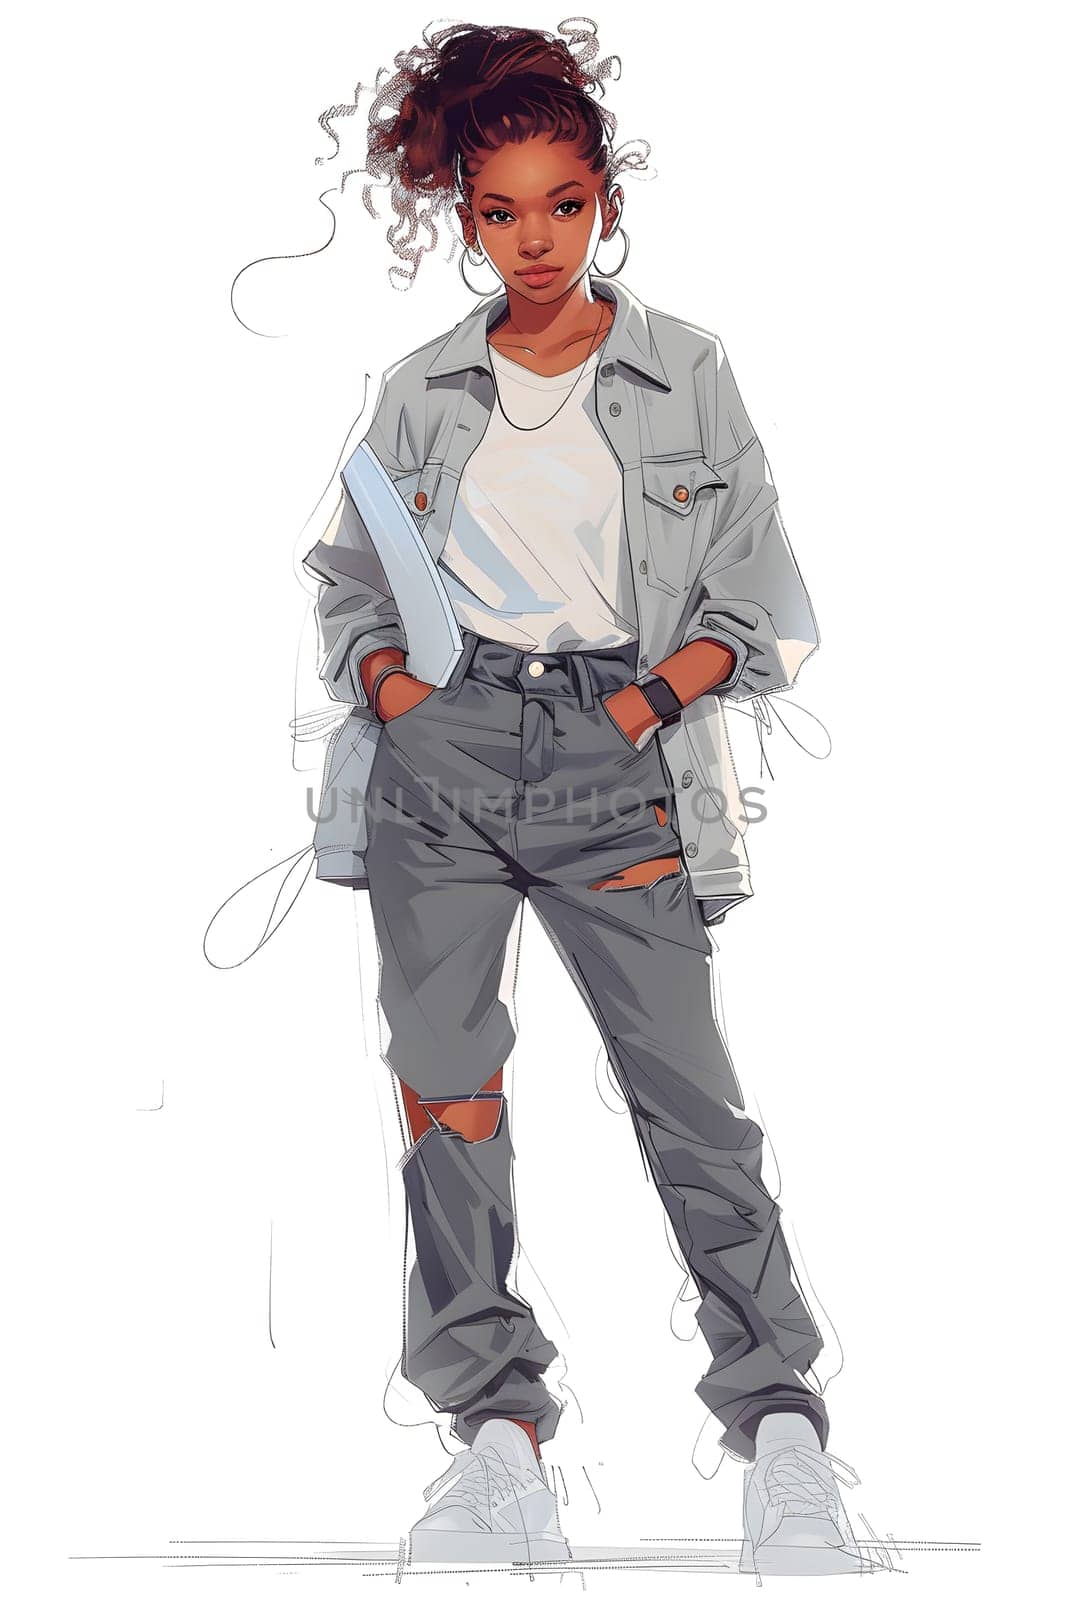 A woman in denim jacket and ripped jeans standing, hands in pockets by Nadtochiy